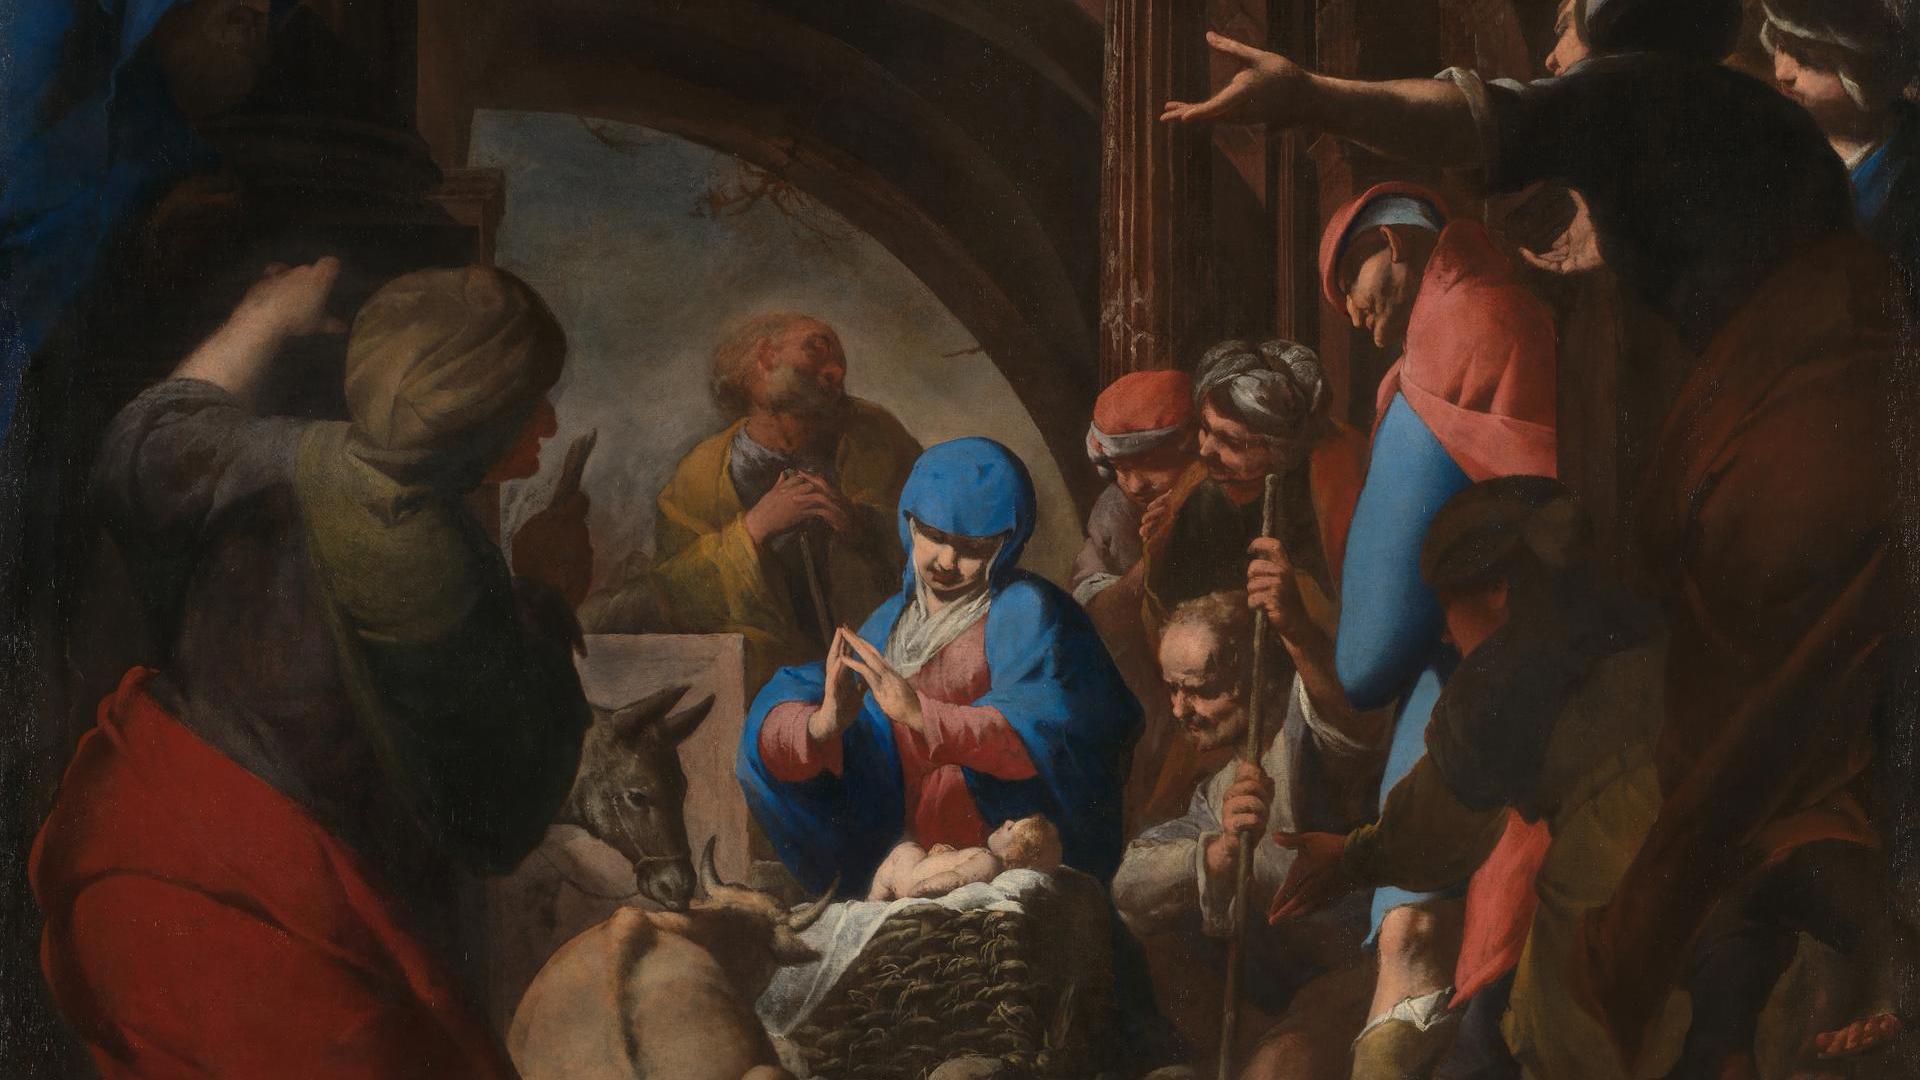 The Adoration of the Shepherds by Giovanni Battista Spinelli